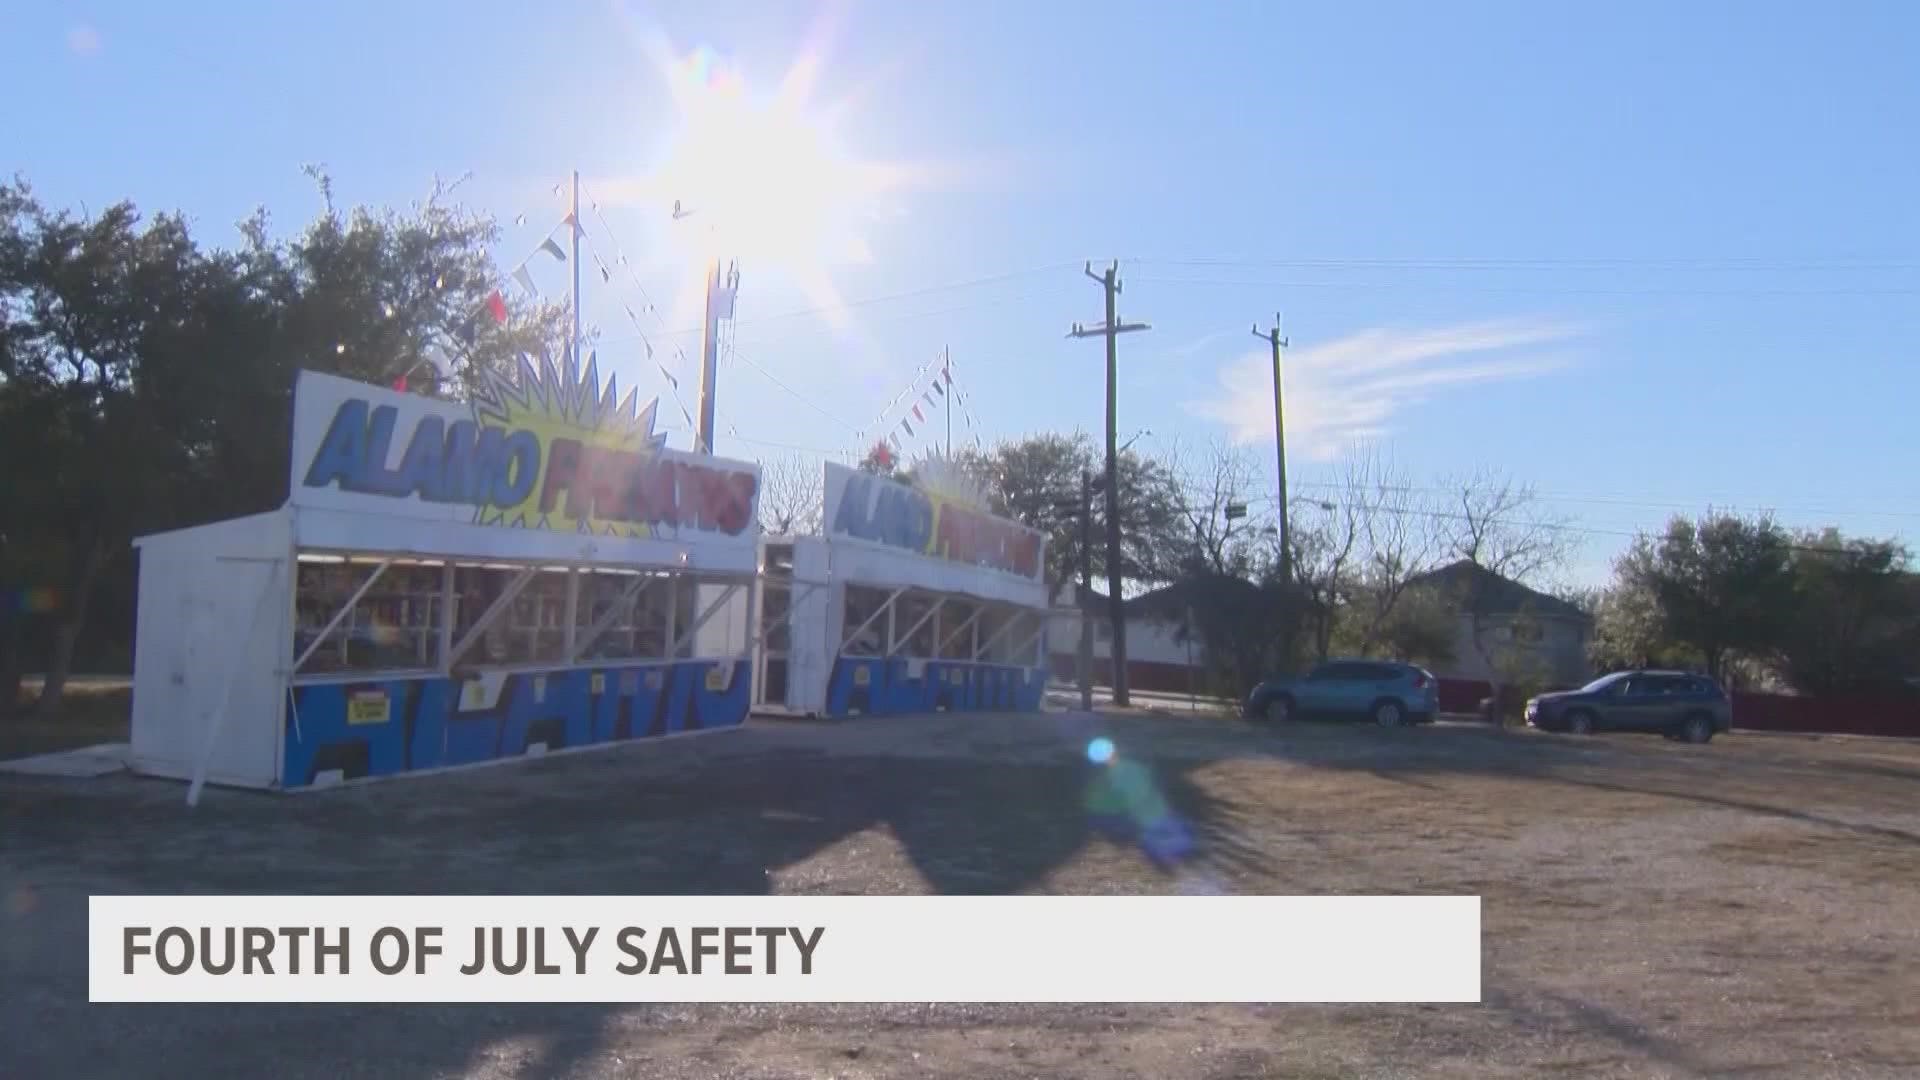 Fireworks and drunk drivers are typically a big problem on Fourth of July weekend.